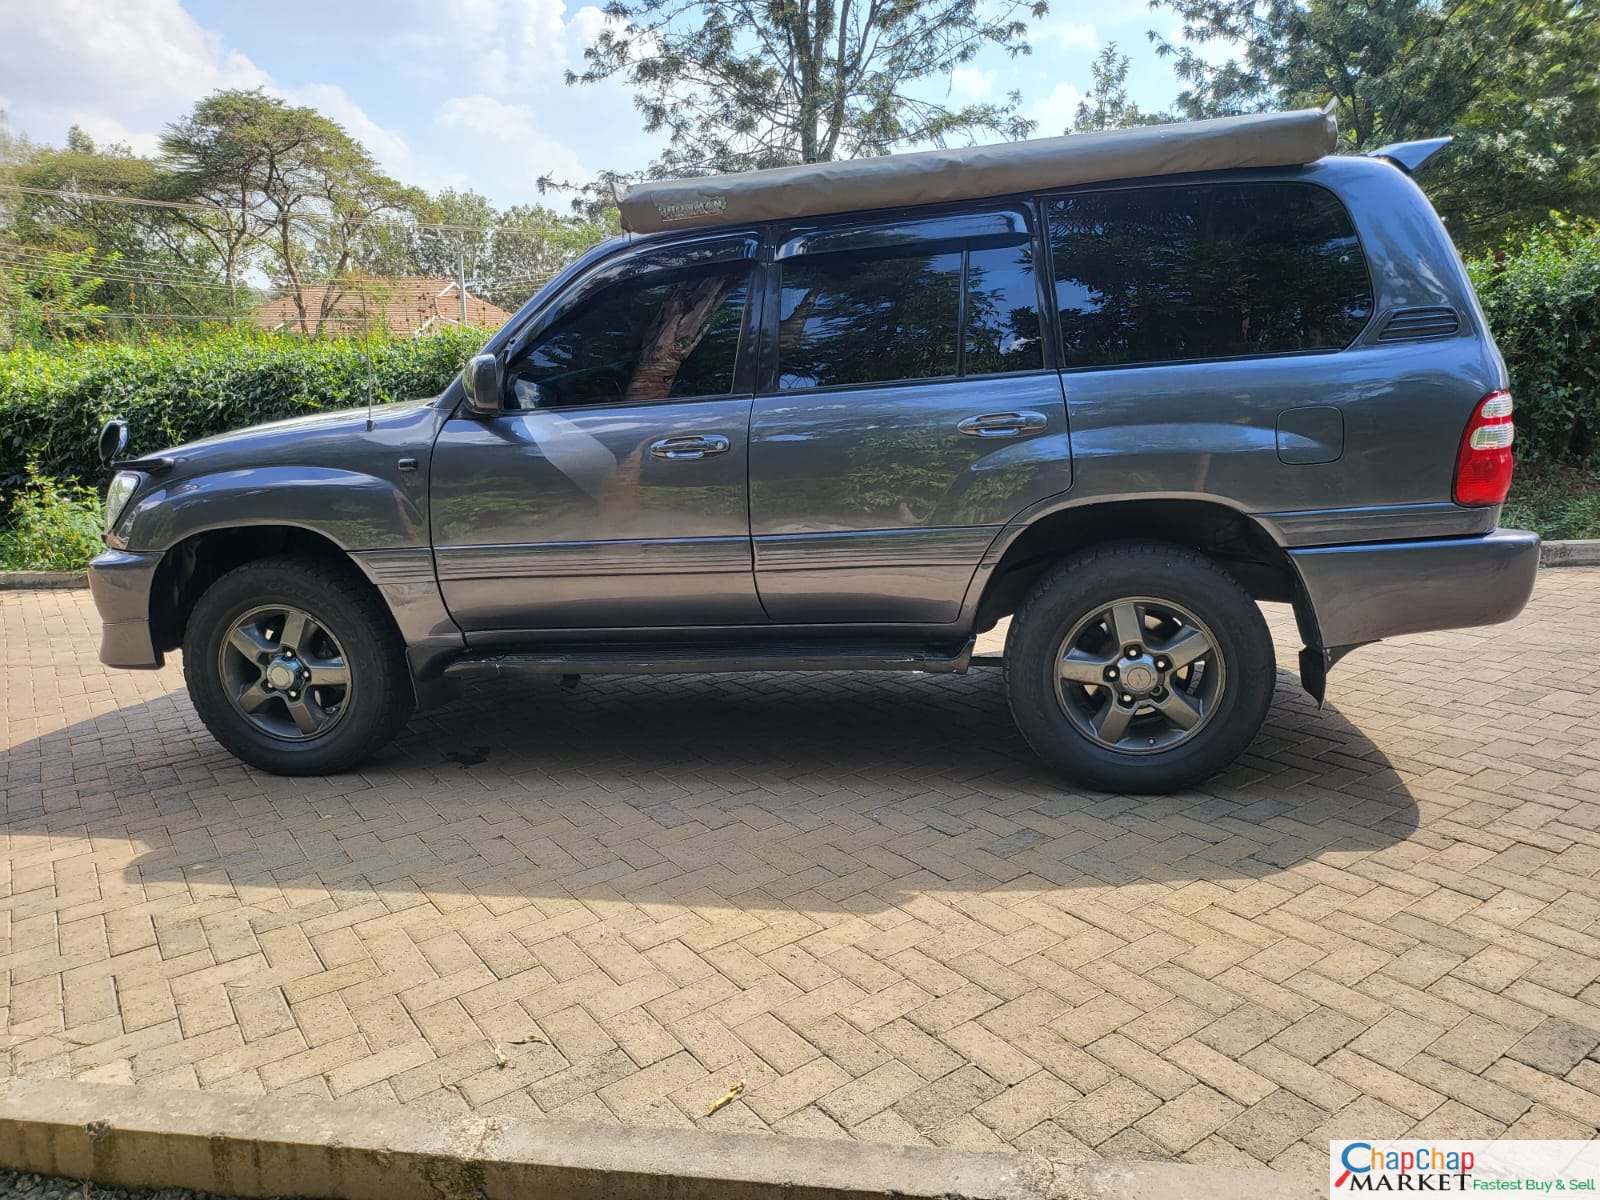 Toyota Landcruiser VX 100 SERIES You Pay 30% Deposit Trade in Ok EXCLUSIVE vx for sale in kenya hire purchase installments